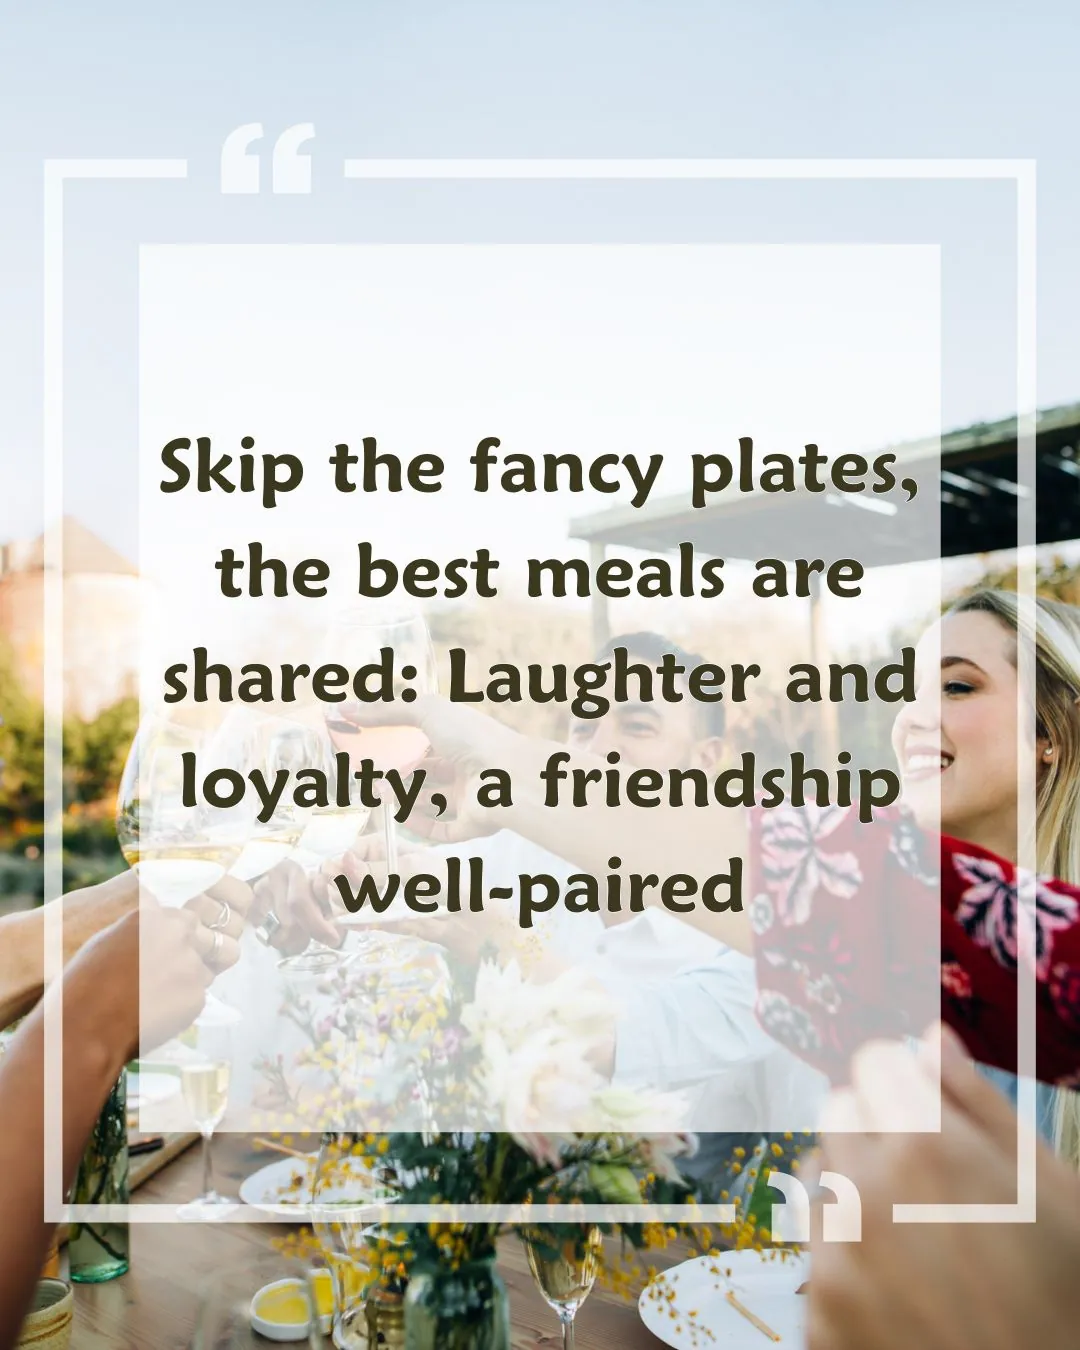 lunch with friends quotes and Images 7